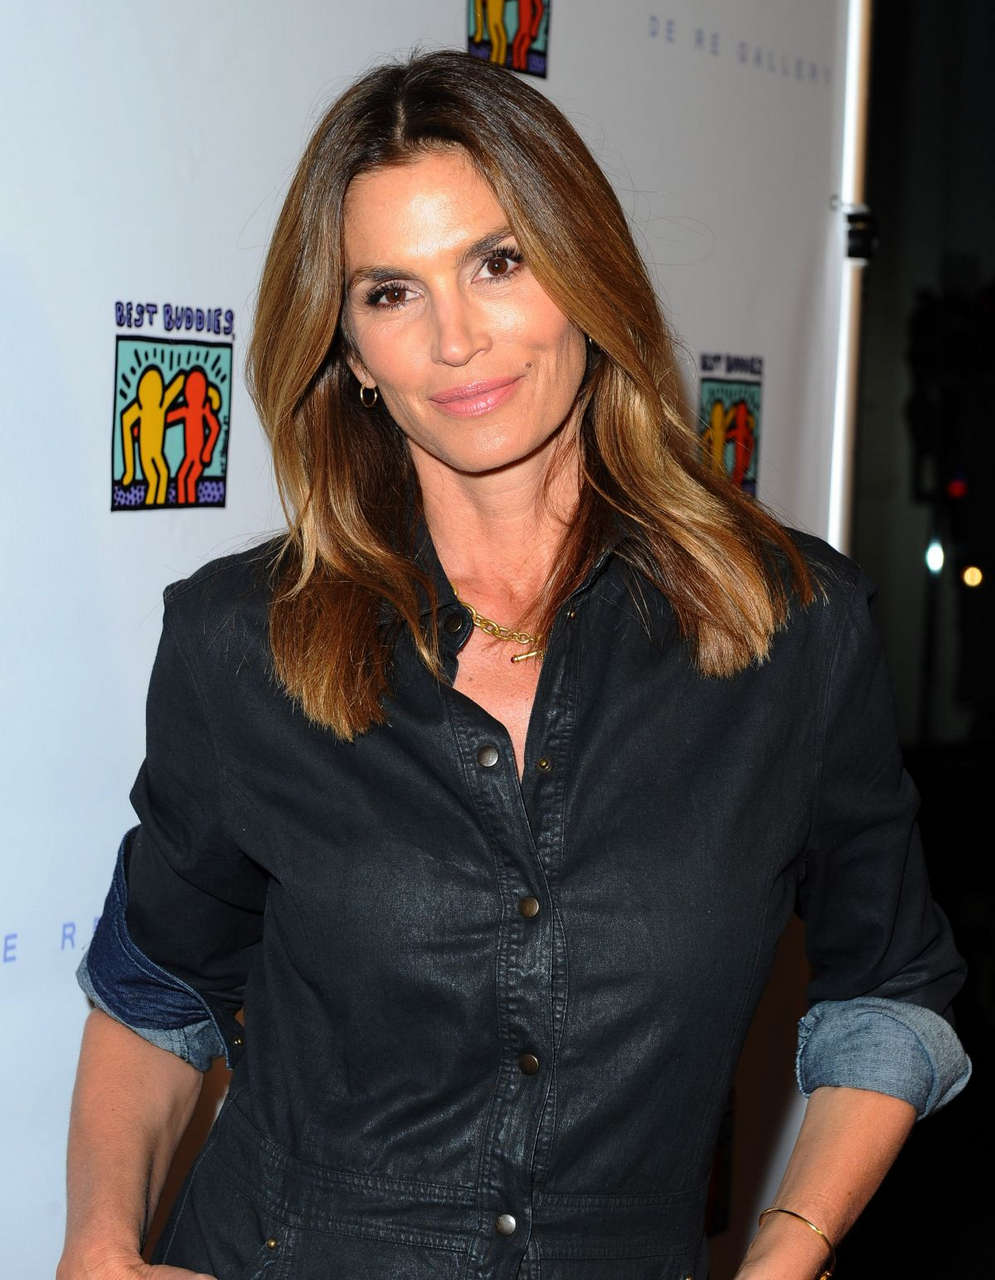 Cindy Crawford Art Of Friendship Benefit Photoauction West Hollywood